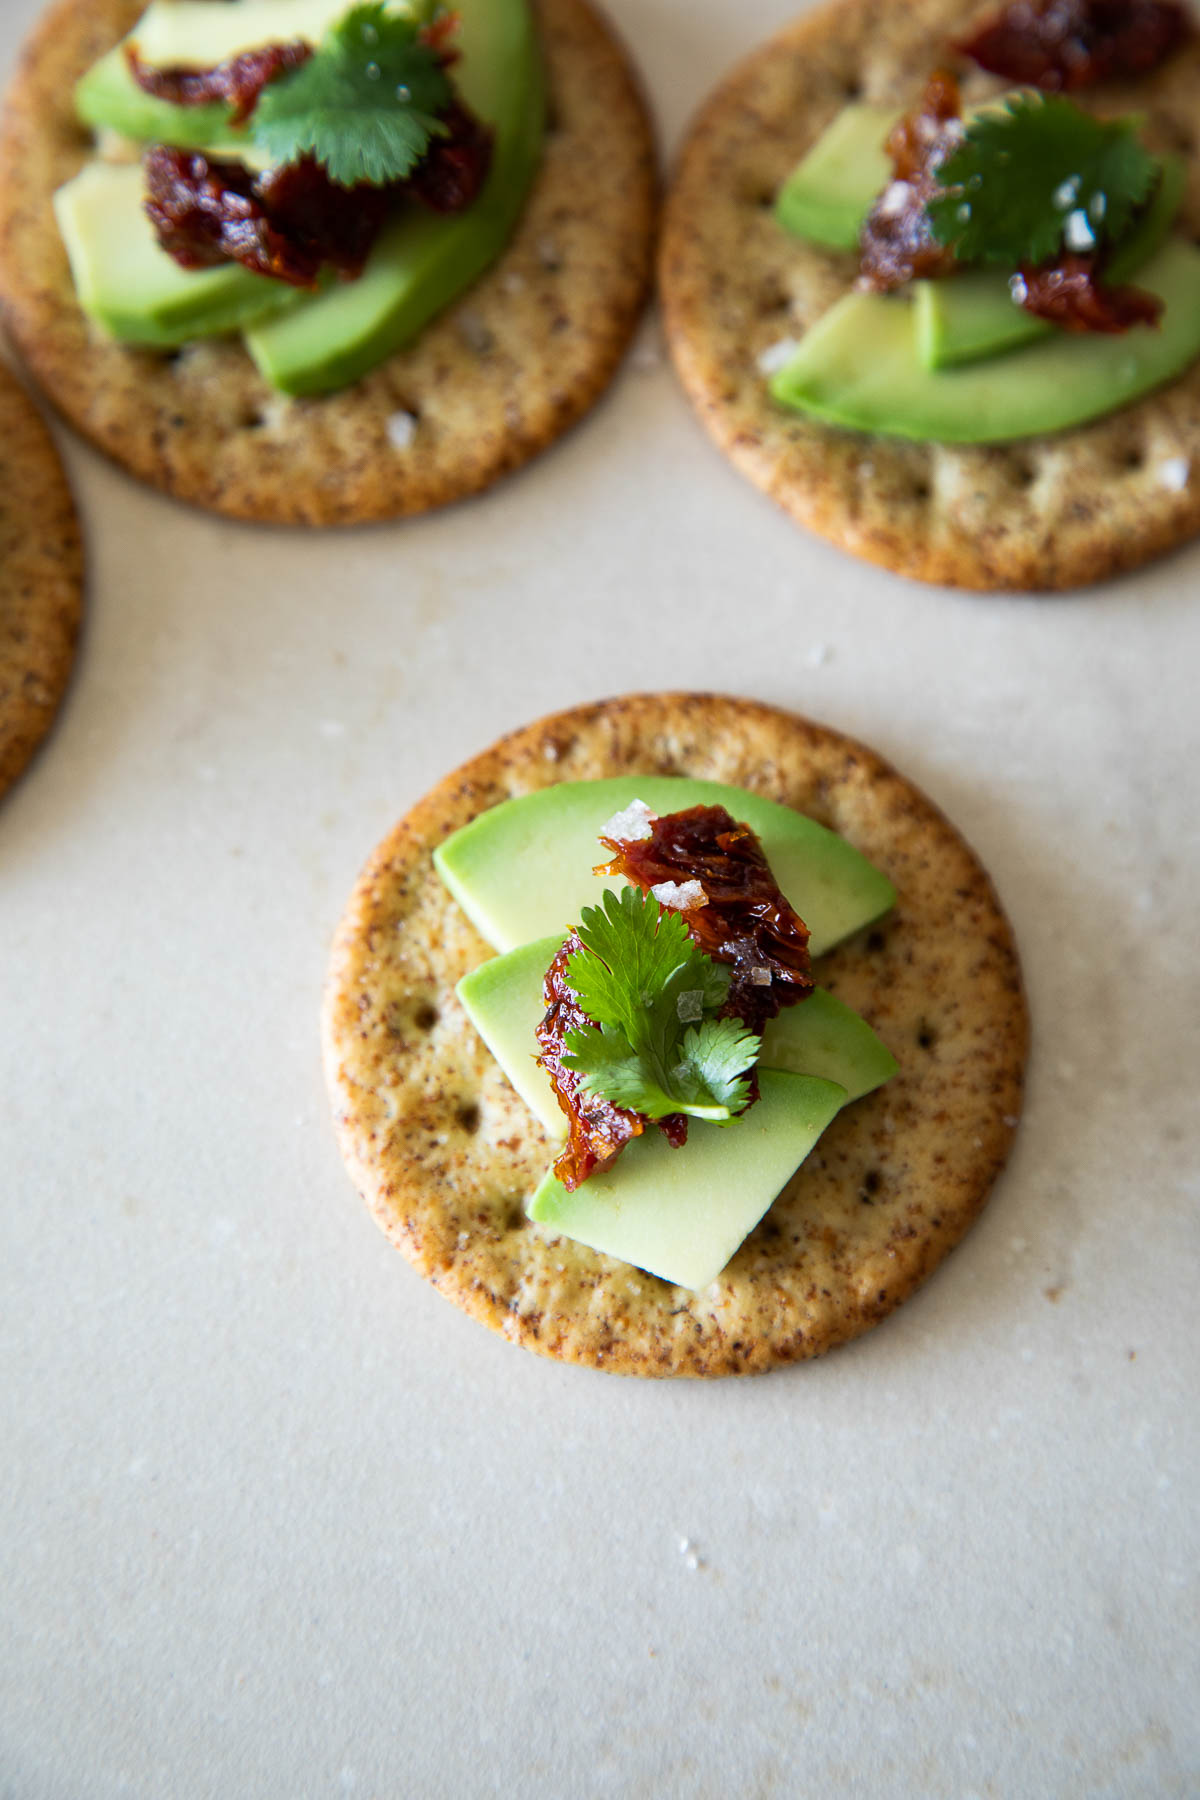 Avocado APPETIZERS Crackers with Sun Dried Tomato, Cilantro Leaves, & Salt on Top